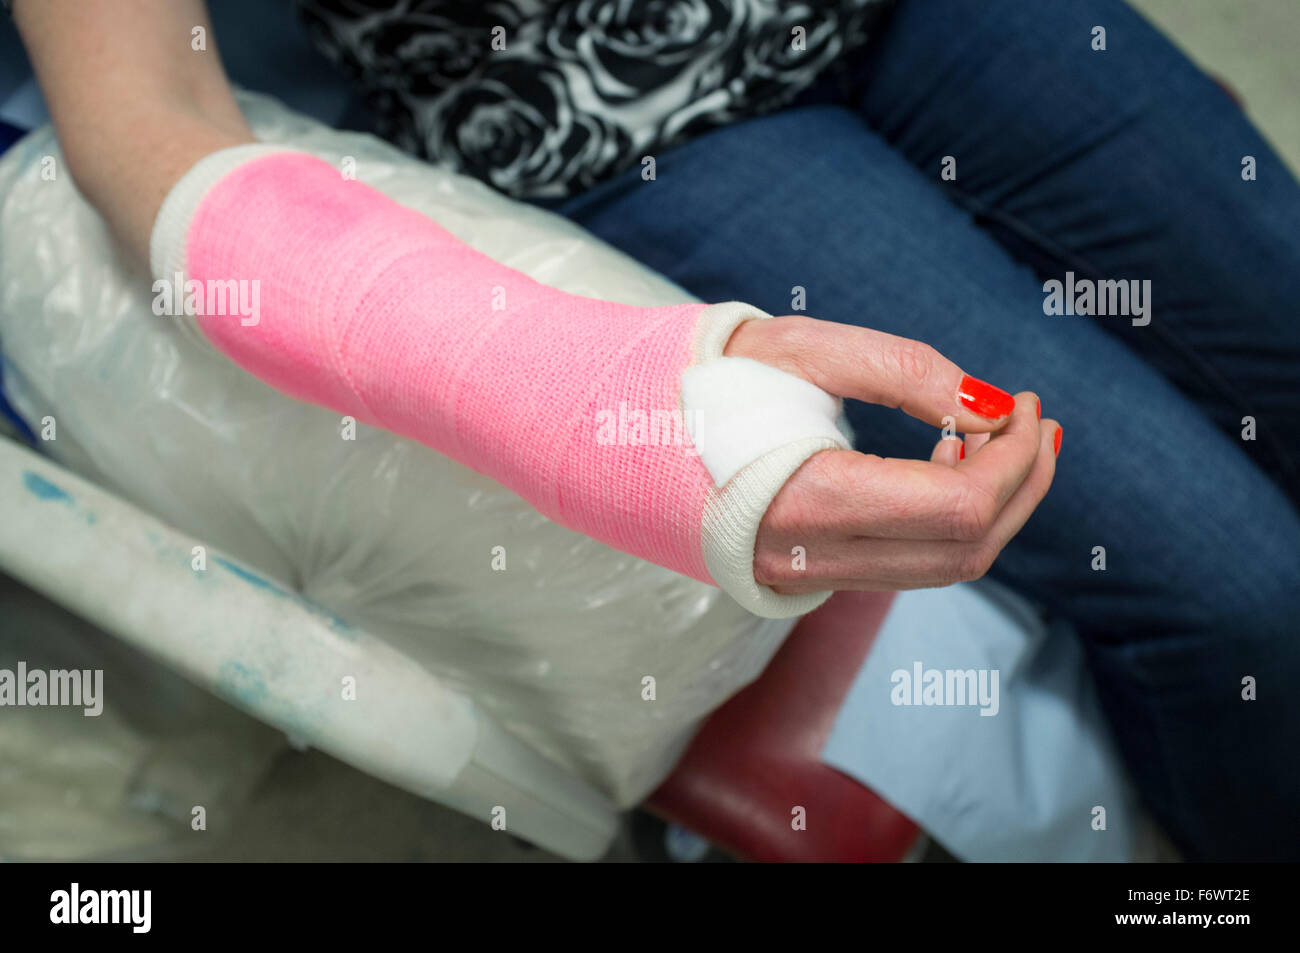 Freshly plastered lady's wrist in a pink plaster cast in a hospital accident and emergency department. Stock Photo